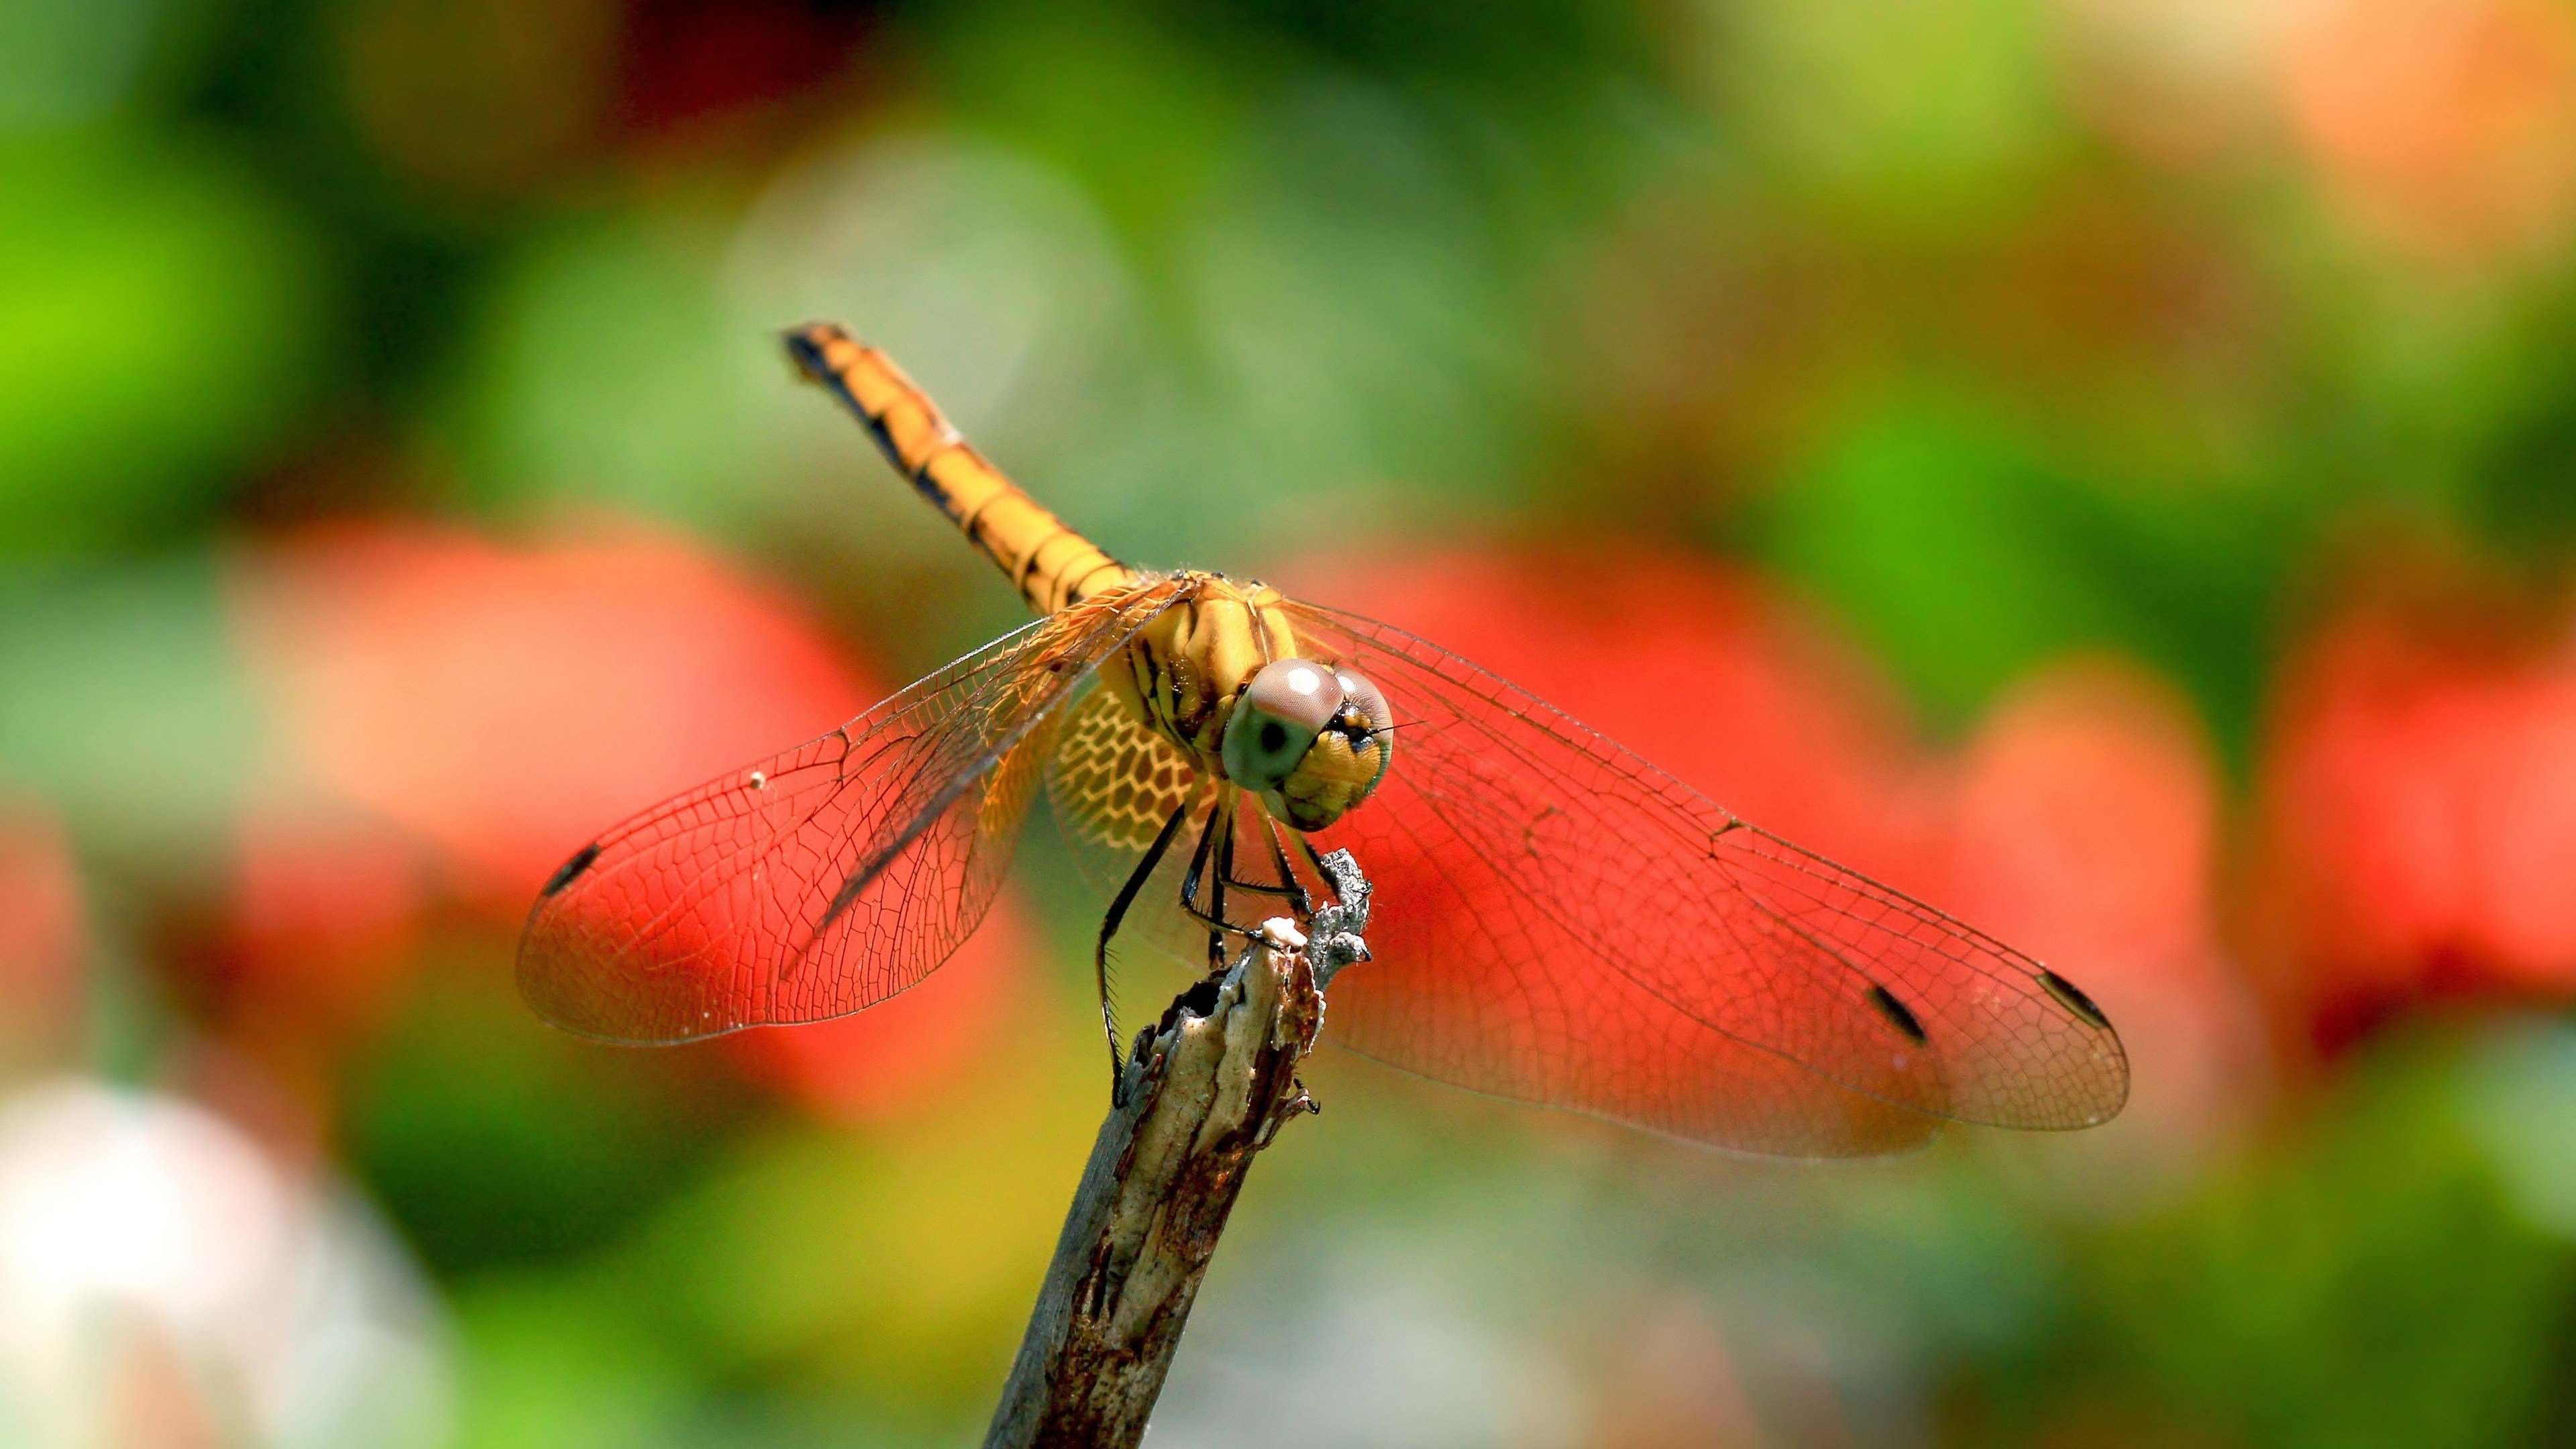 Download uhd 4k Dragonfly PC background ID:467687 for free